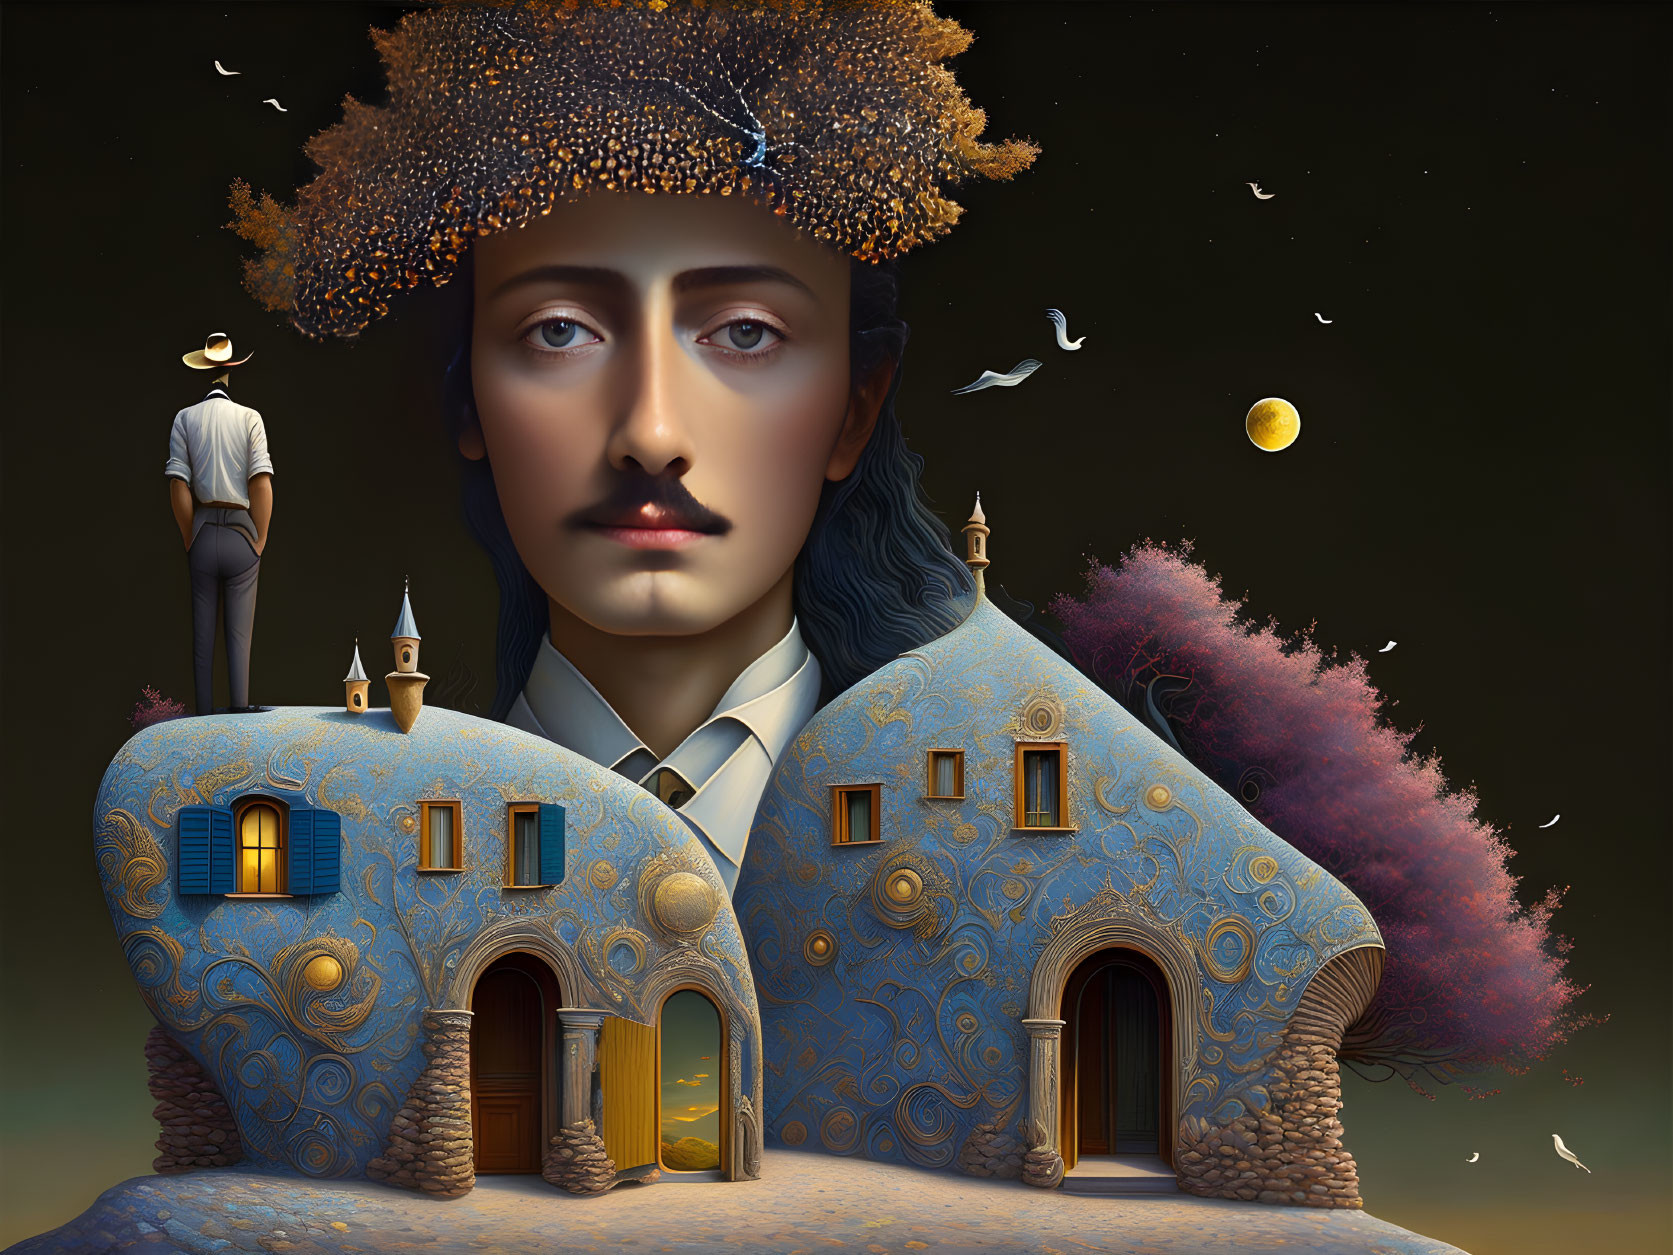 Portrait blending with architectural elements: head transforms into houses with tiny figure, birds, and moon.